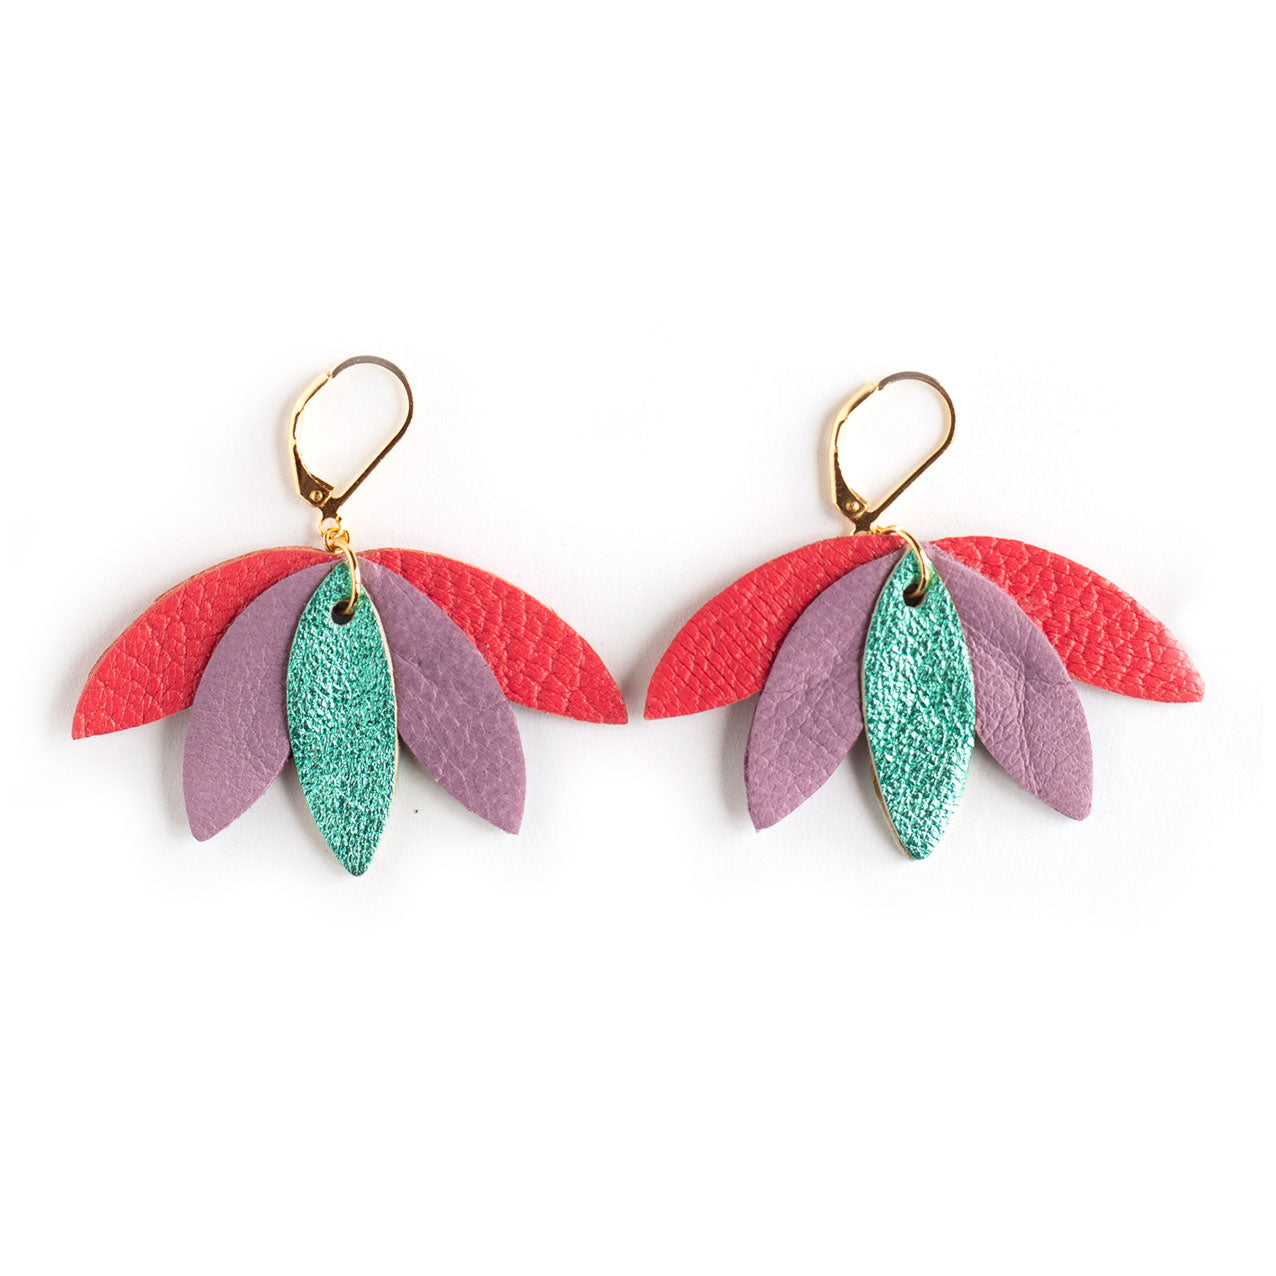 Palm tree earrings in coral cyan blue gold leather